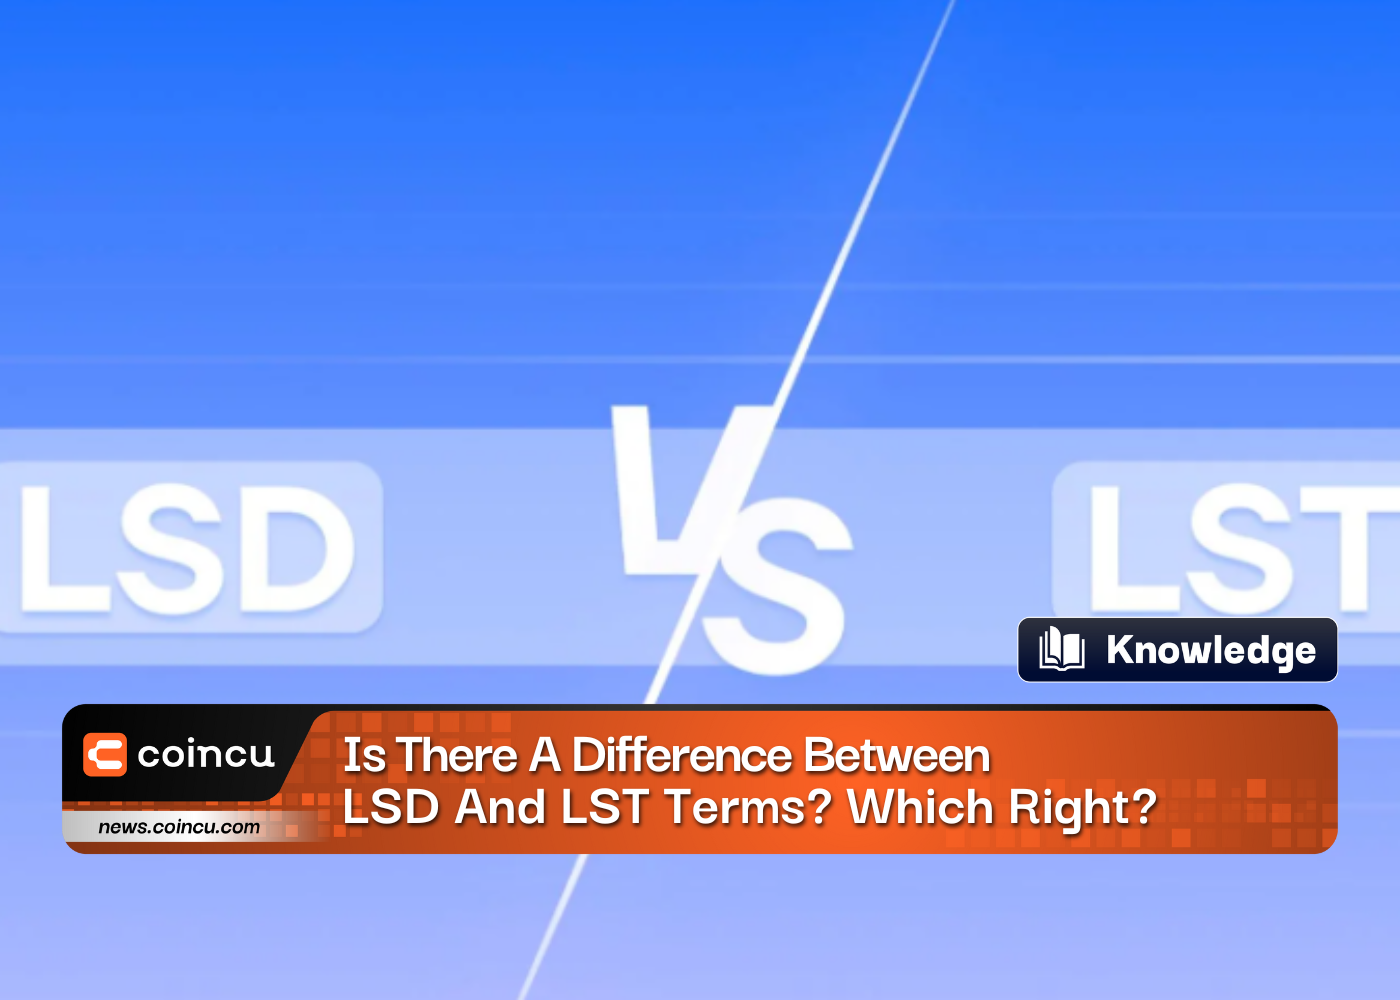 Is There A Difference Between LSD And LST Terms? Which Right?